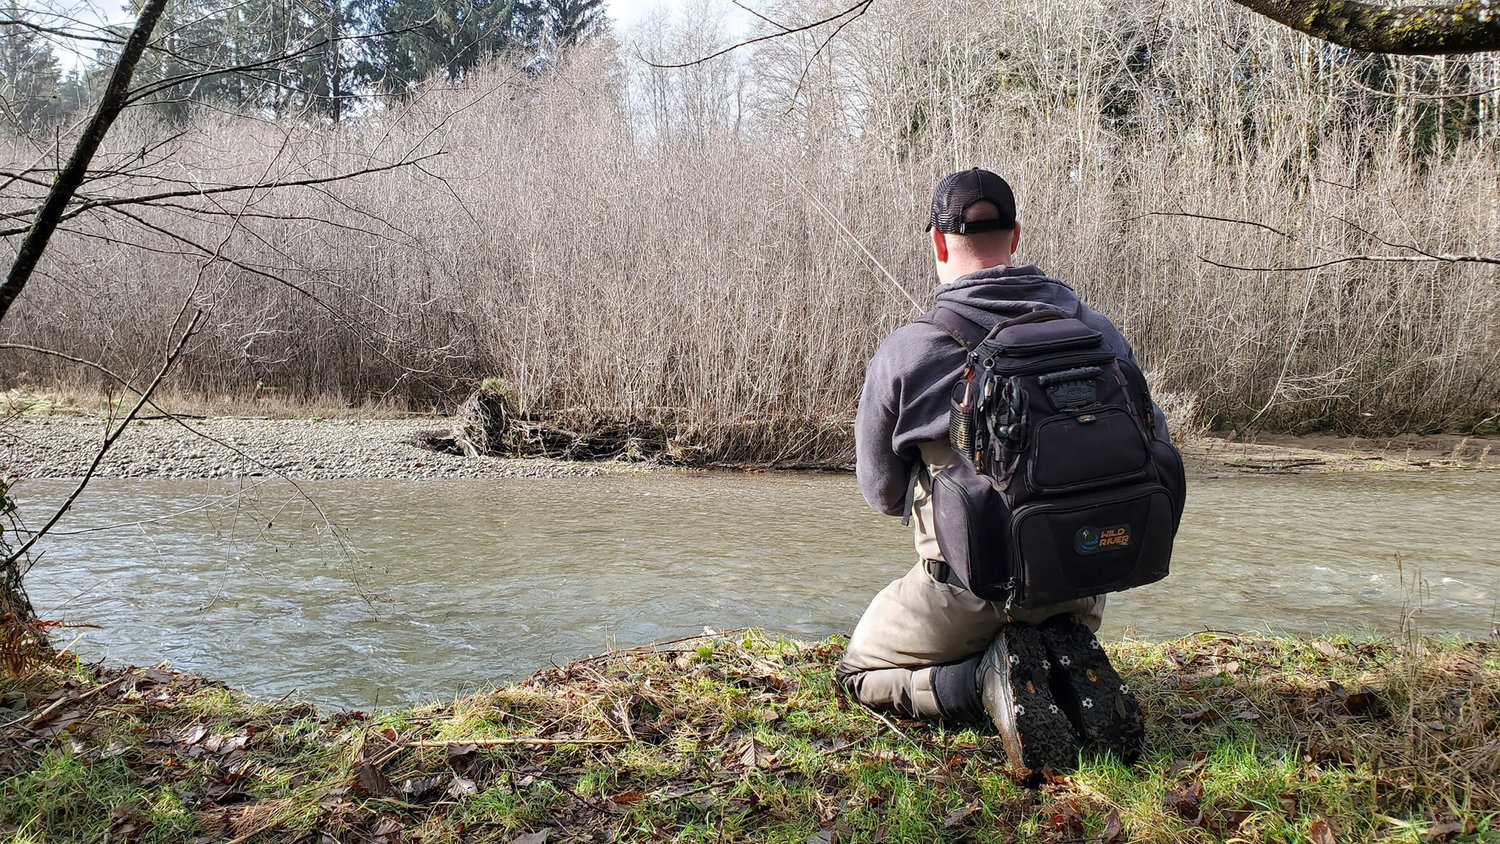 Tyson Lorton fishes for steelhead on the Queets River on the Quinault Indian Reservation on January 17, 2021.